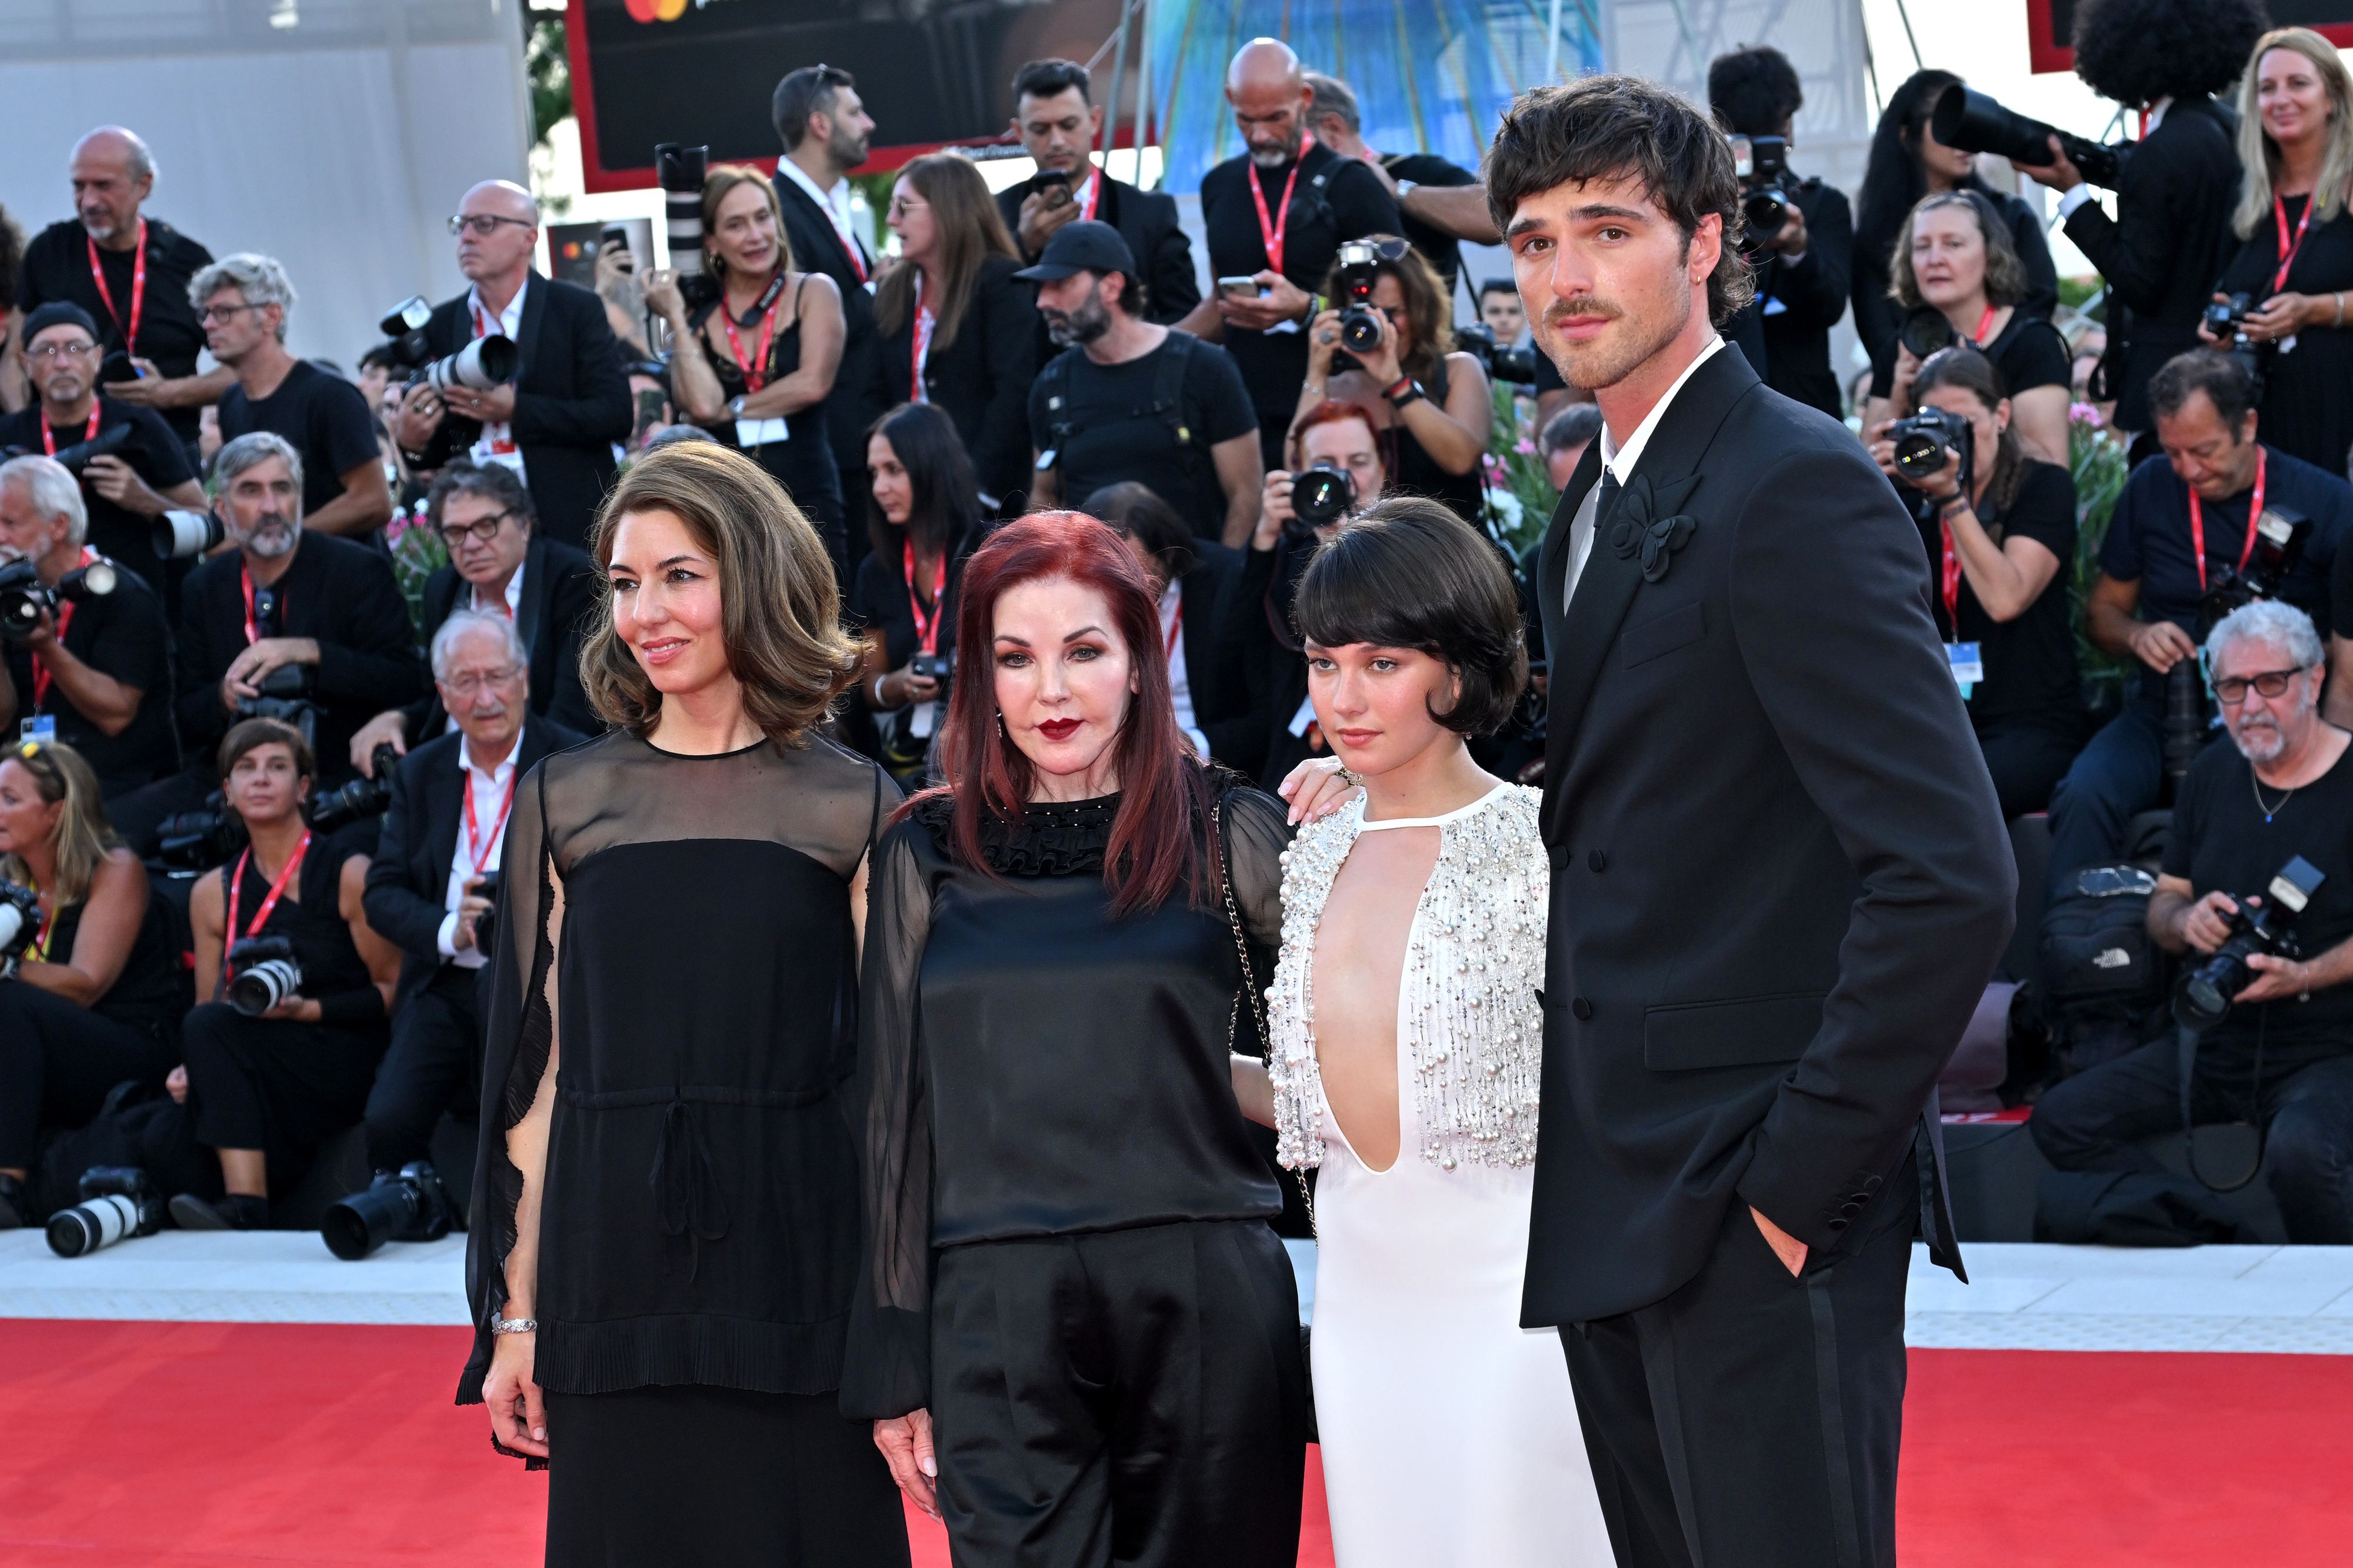 Sofia Coppola, Priscilla Presley, Cailee Spaeny, and Jacob Elordi on the red carpet